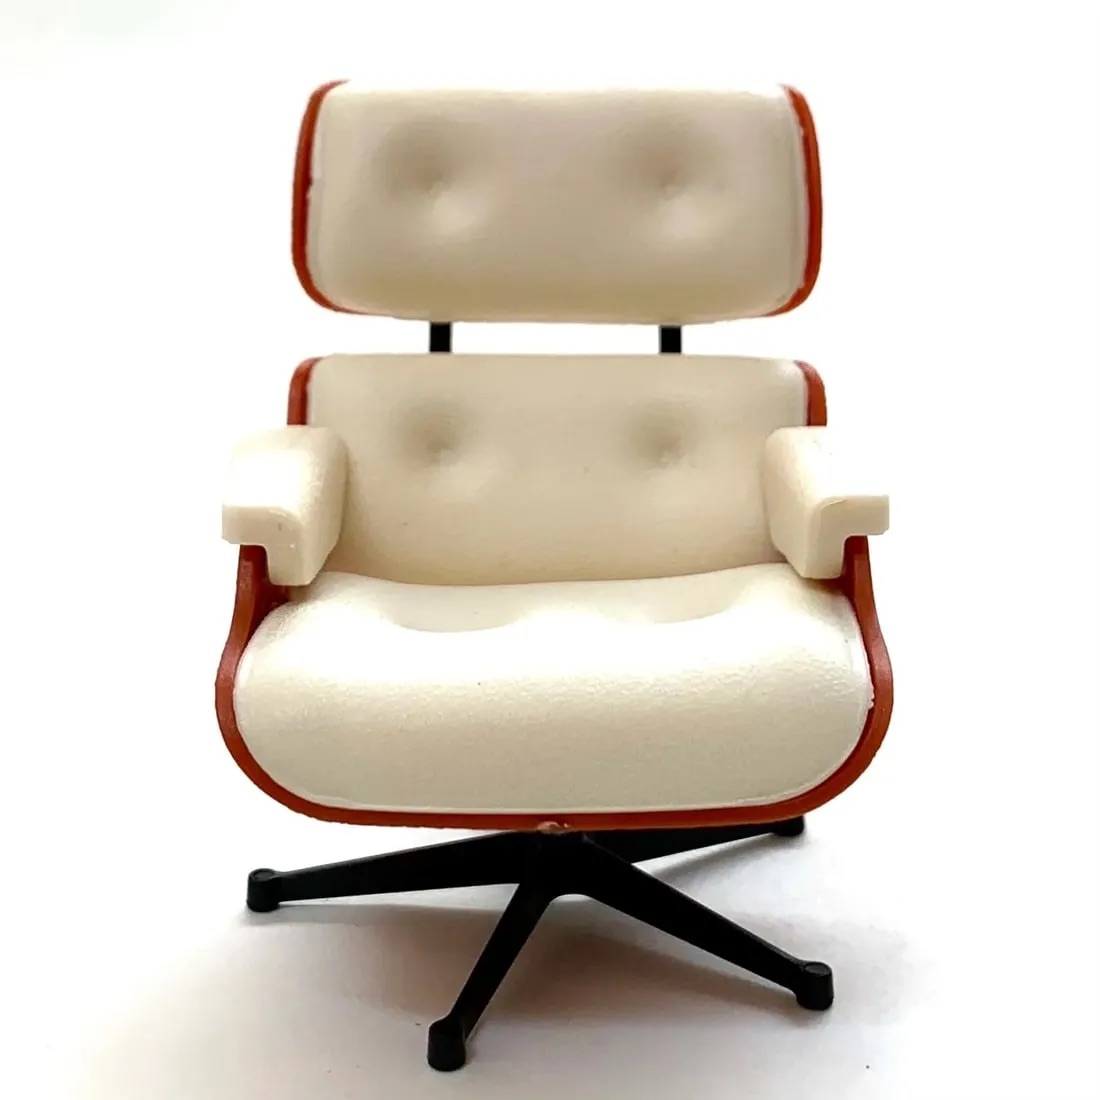 Eames White Lounge Chair Desk Display - Image 2 of 4